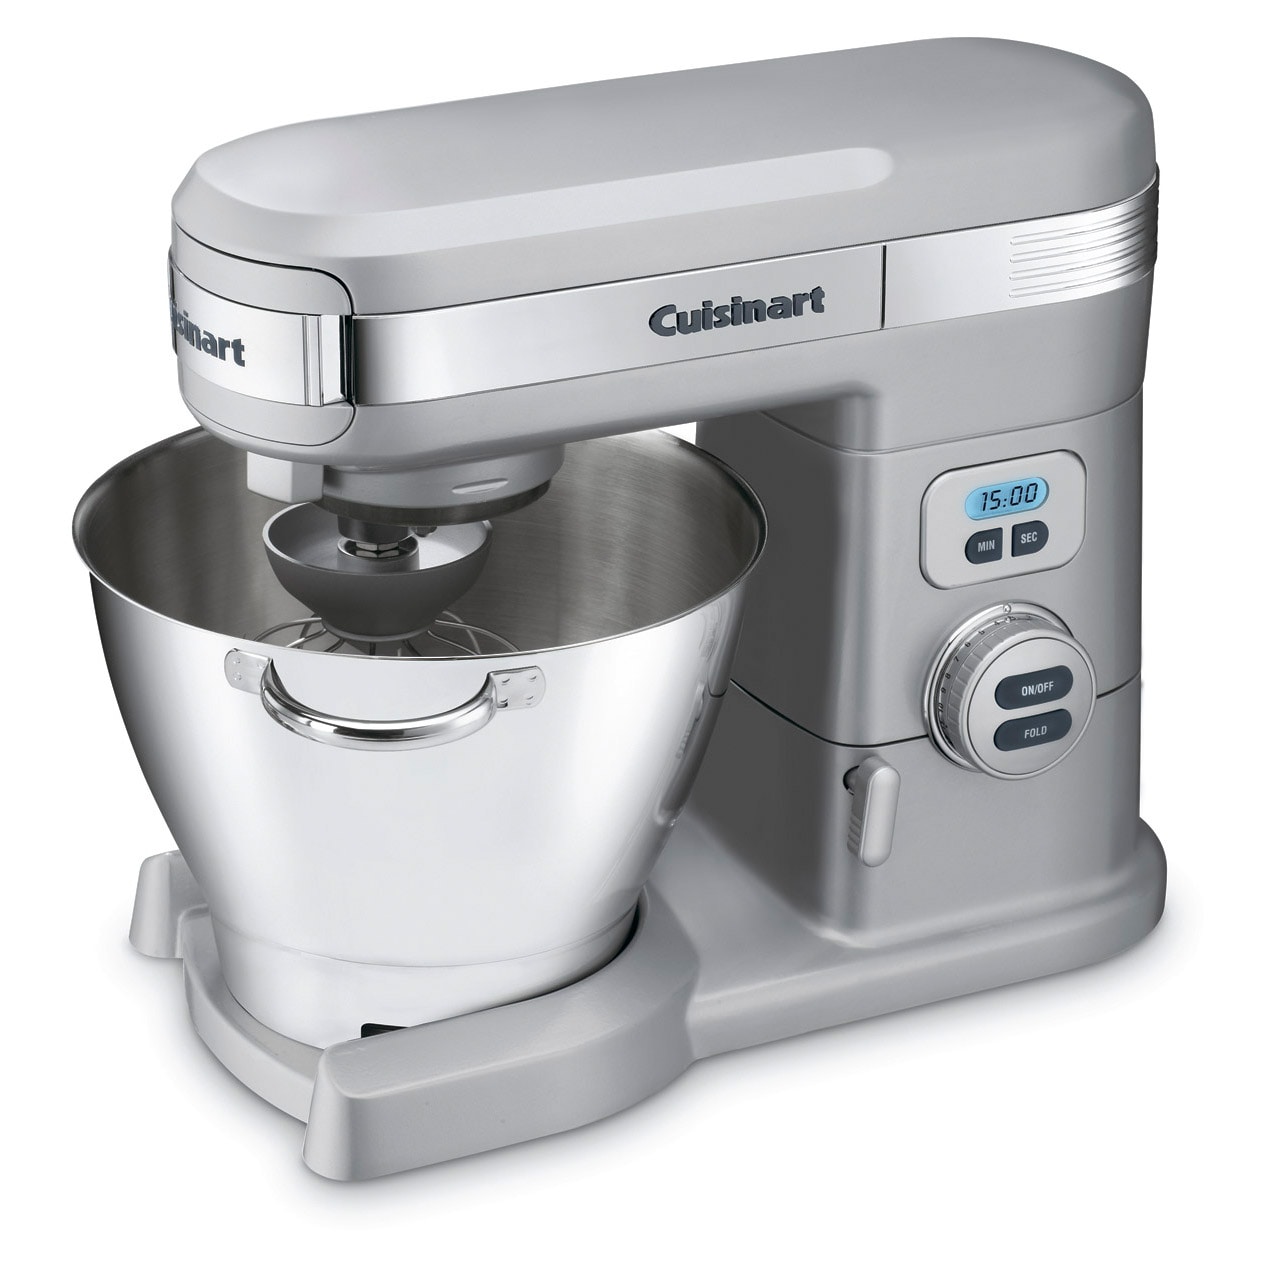 https://ak1.ostkcdn.com/images/products/4216784/Cuisinart-SM-55BC-Brushed-Chrome-5.5-quart-Stand-Mixer-with-Attachments-732eba1f-2496-4a9e-9510-e3051356c402.jpg